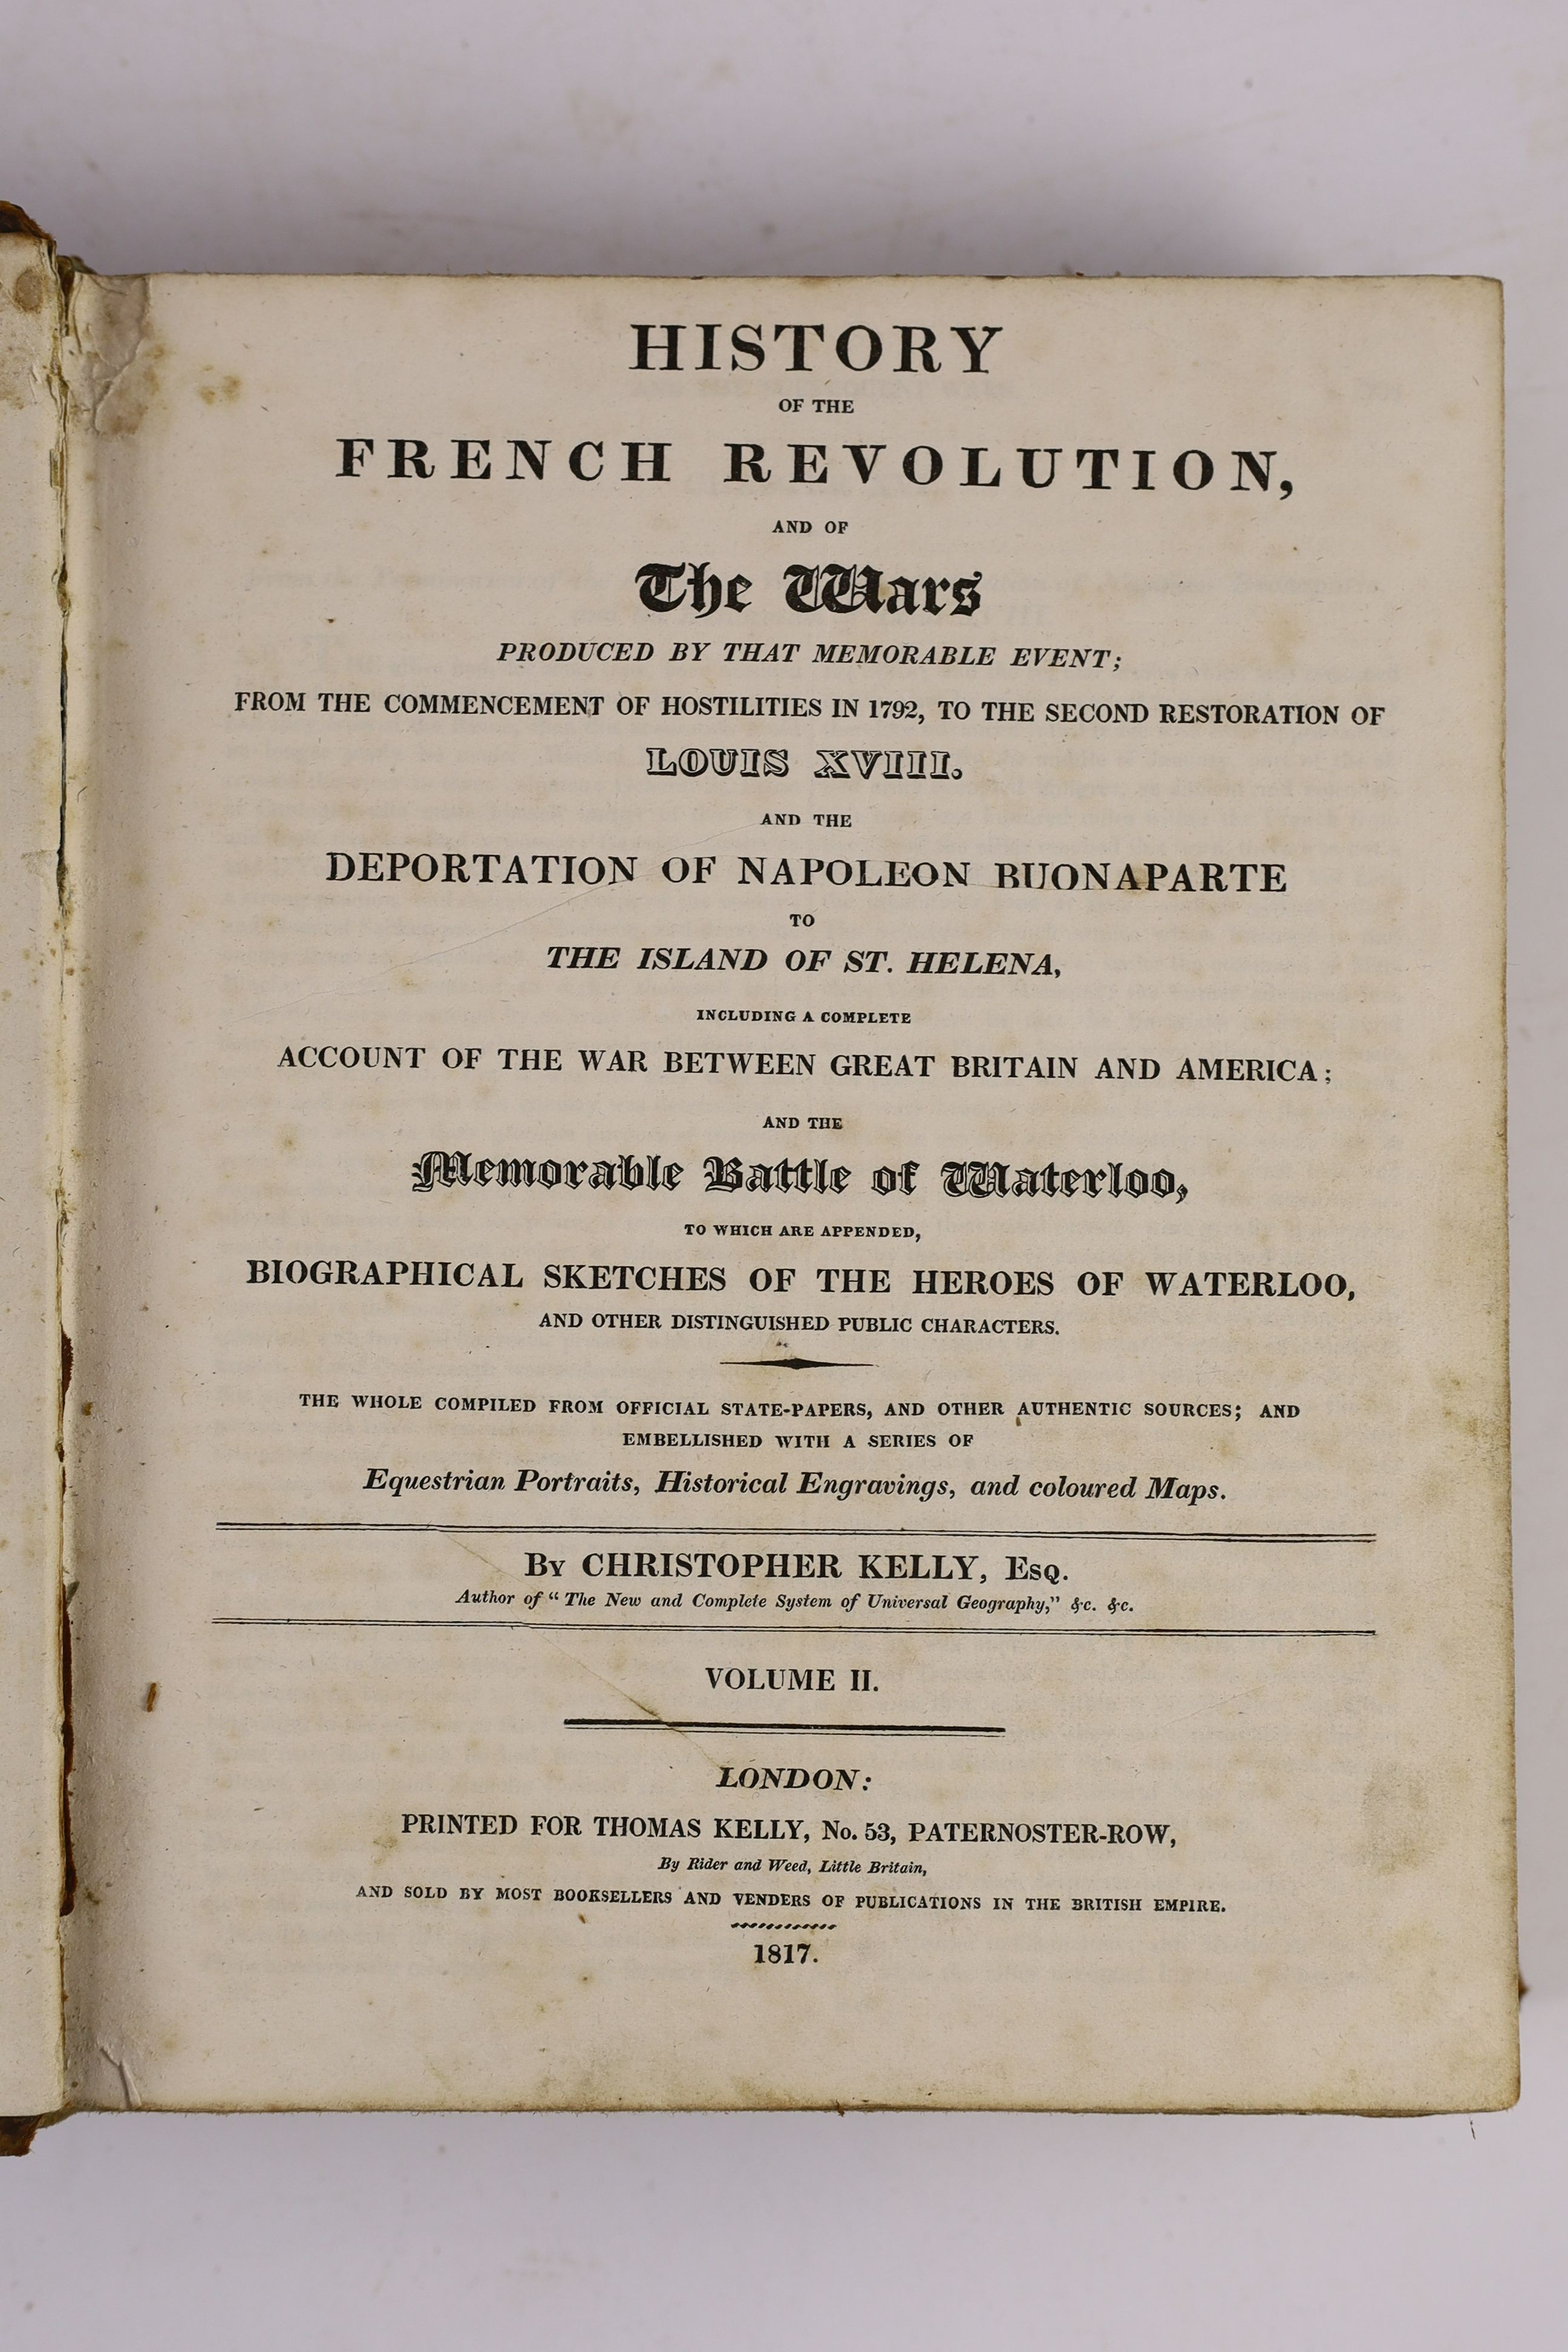 Kelly, Christopher - History of the French Revolution and of The Wars, 2 vols, 4to, calf, with 69 coloured engraved plates and maps, Thomas Kelly, London, 1817